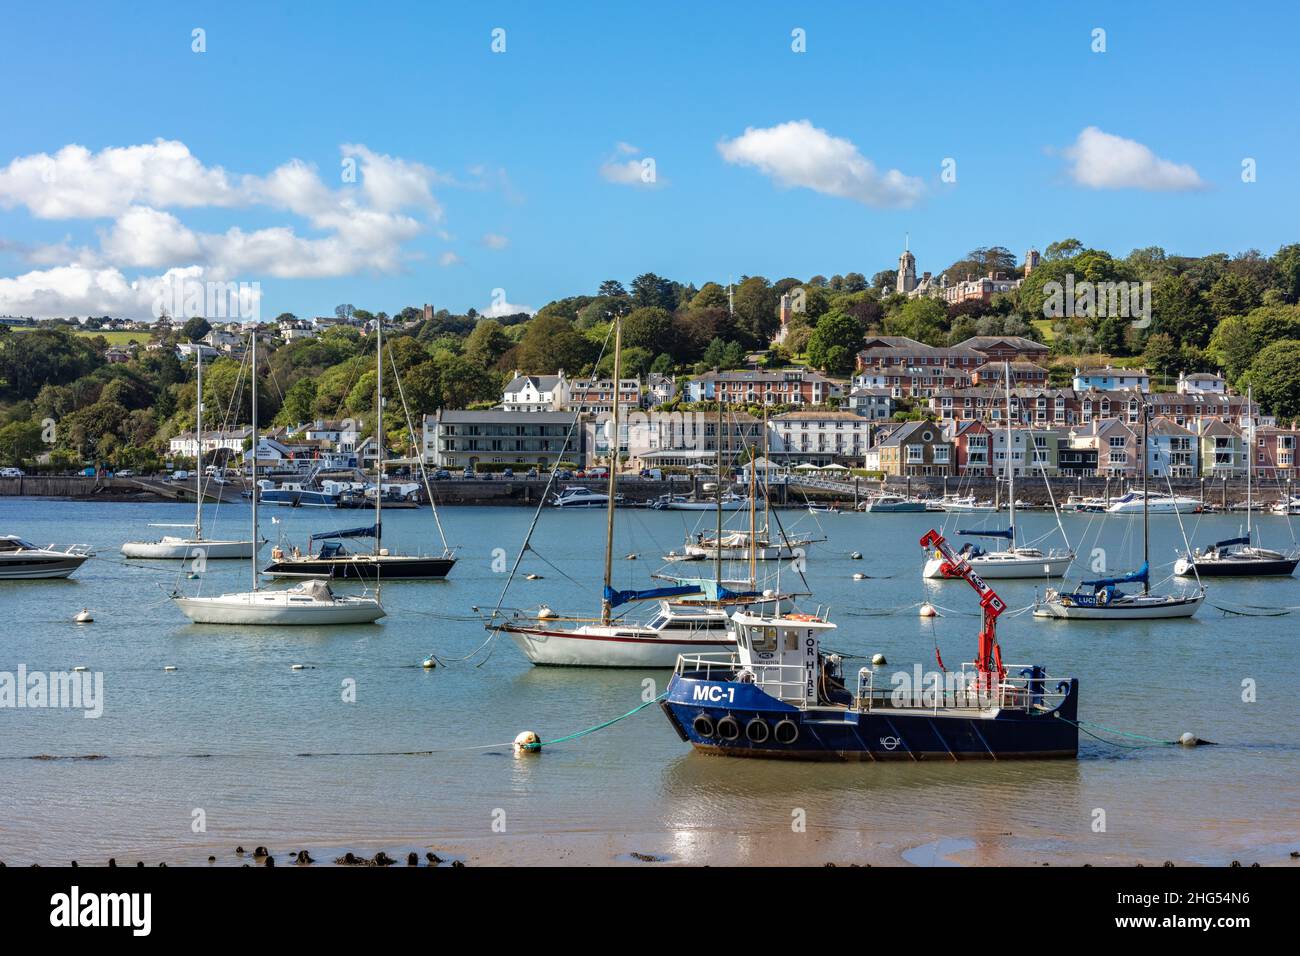 Ships moored in Dartmouth harbour with Britannia Royal Naval College in the background, Devon, England, United Kingdom Stock Photo